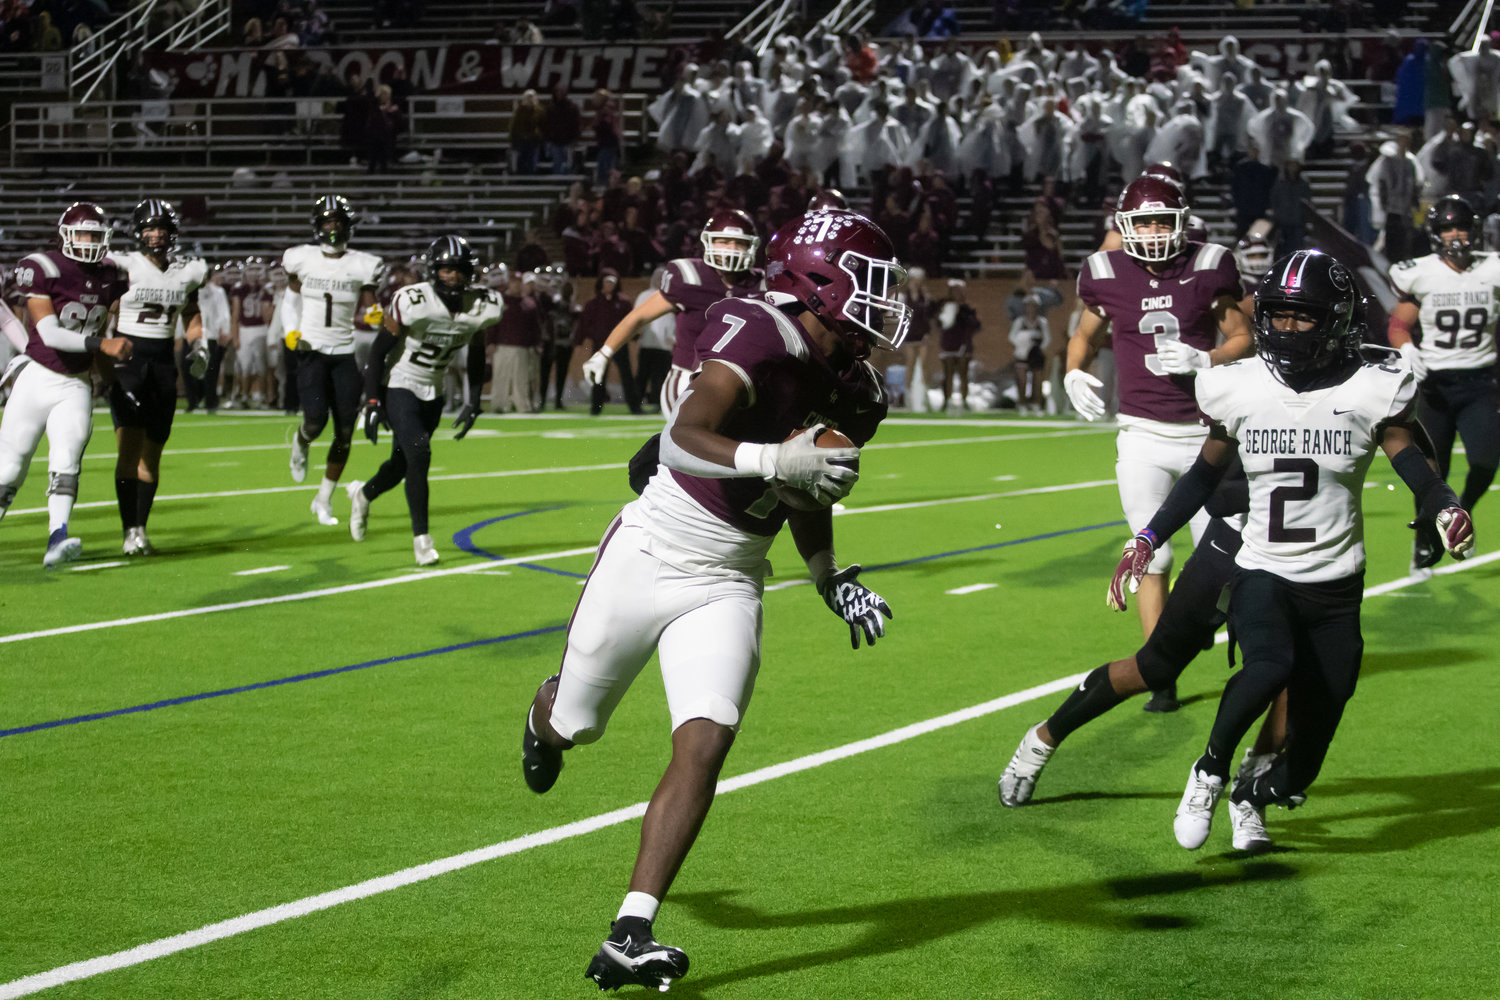 Sam McKnight runs in a touchdown during Friday's game between Cinco Ranch and George Ranch at Rhodes Stadium.